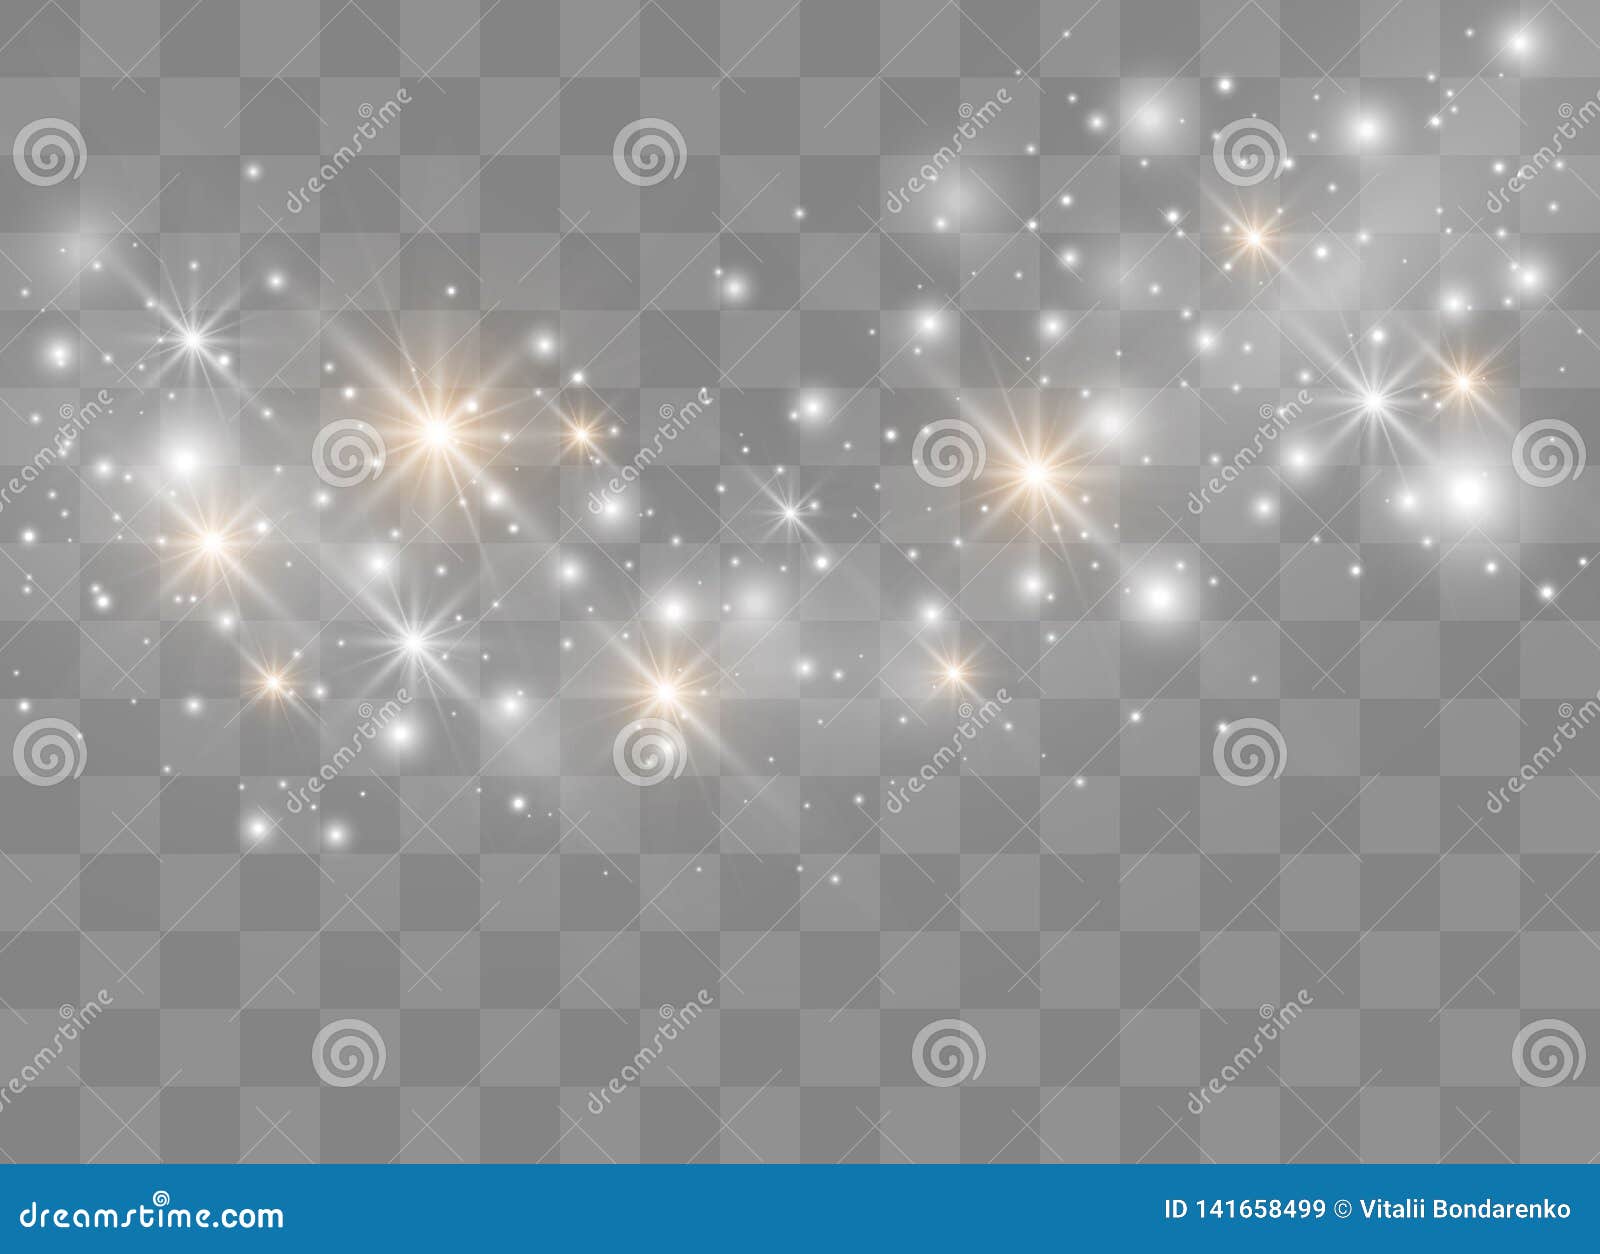 https://thumbs.dreamstime.com/z/sparks-glitter-special-light-effect-vector-sparkles-transparent-background-christmas-abstract-pattern-sparkling-magic-dust-p-141658499.jpg